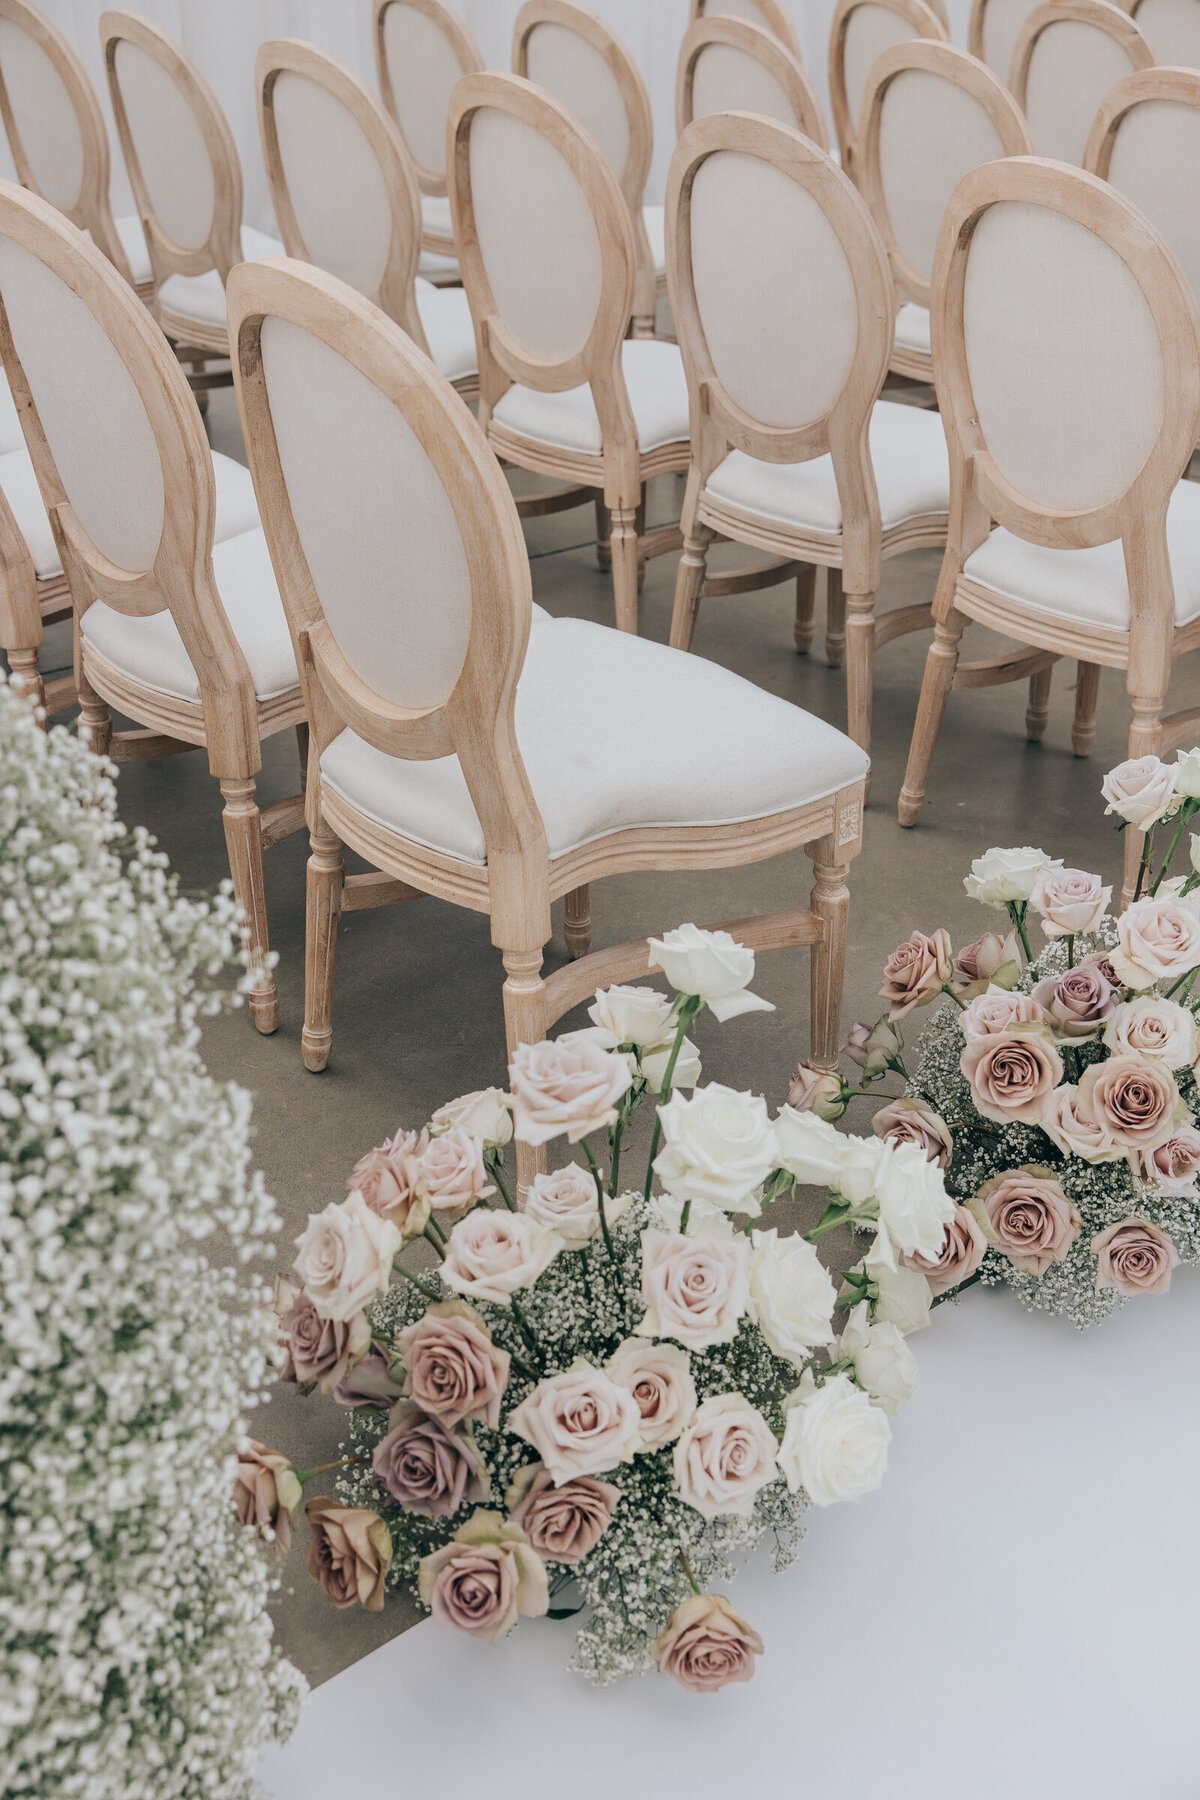 Rose filled ivory and  lavender themed wedding reception